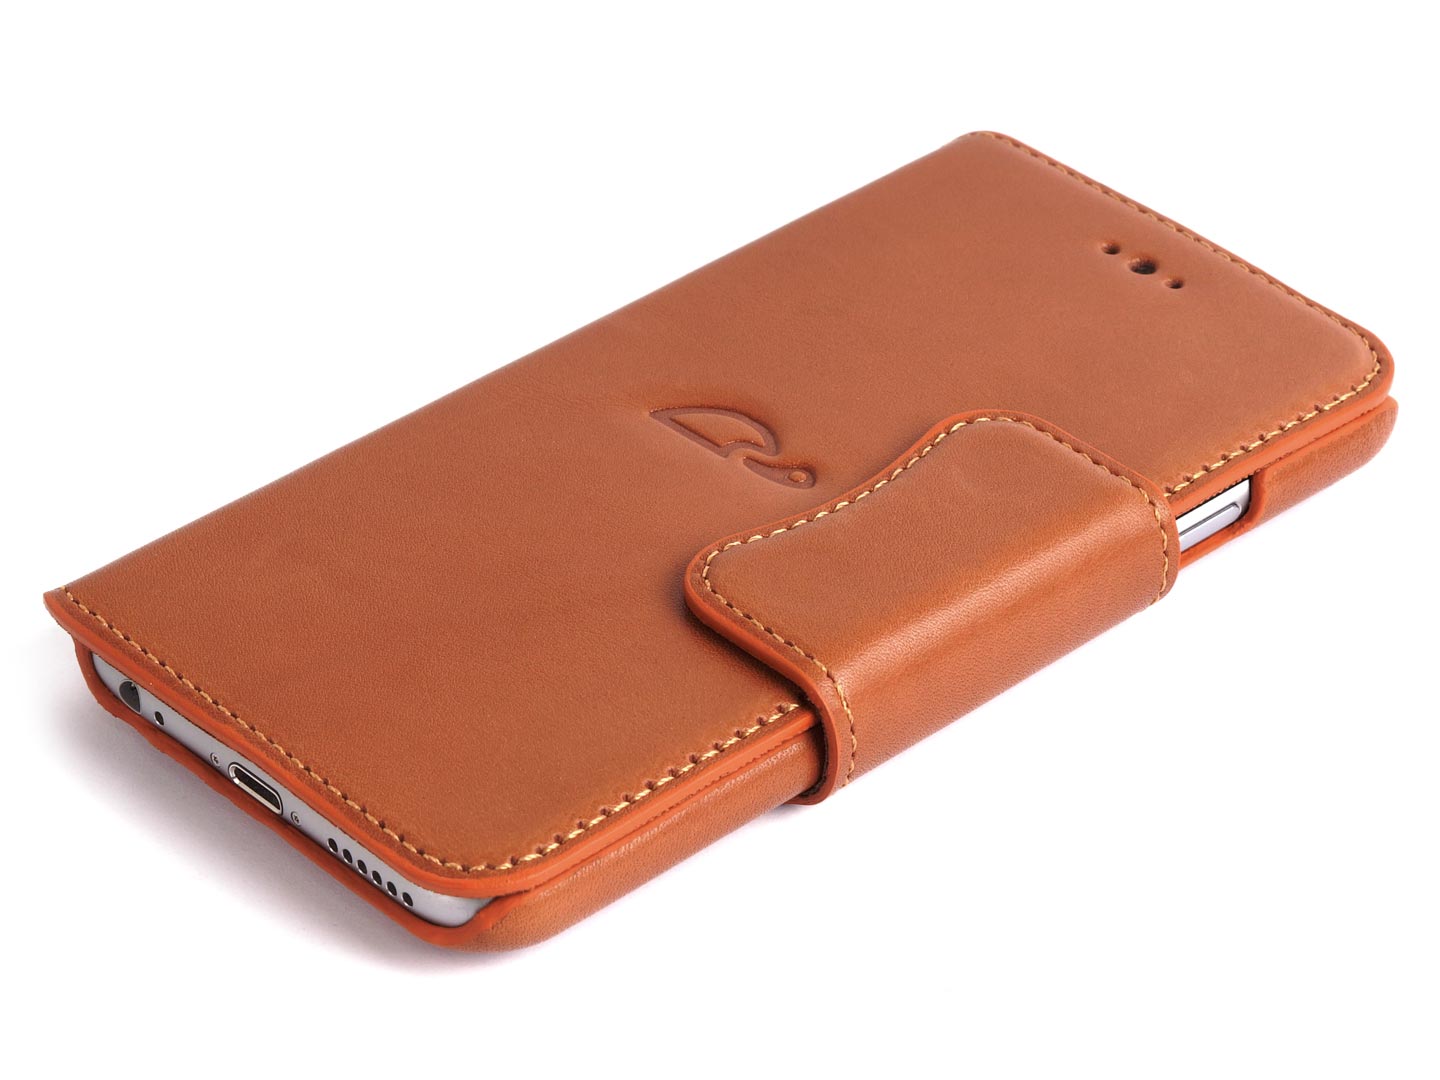 Wallet case iPhone 6 natural leather - tan - Carapaz